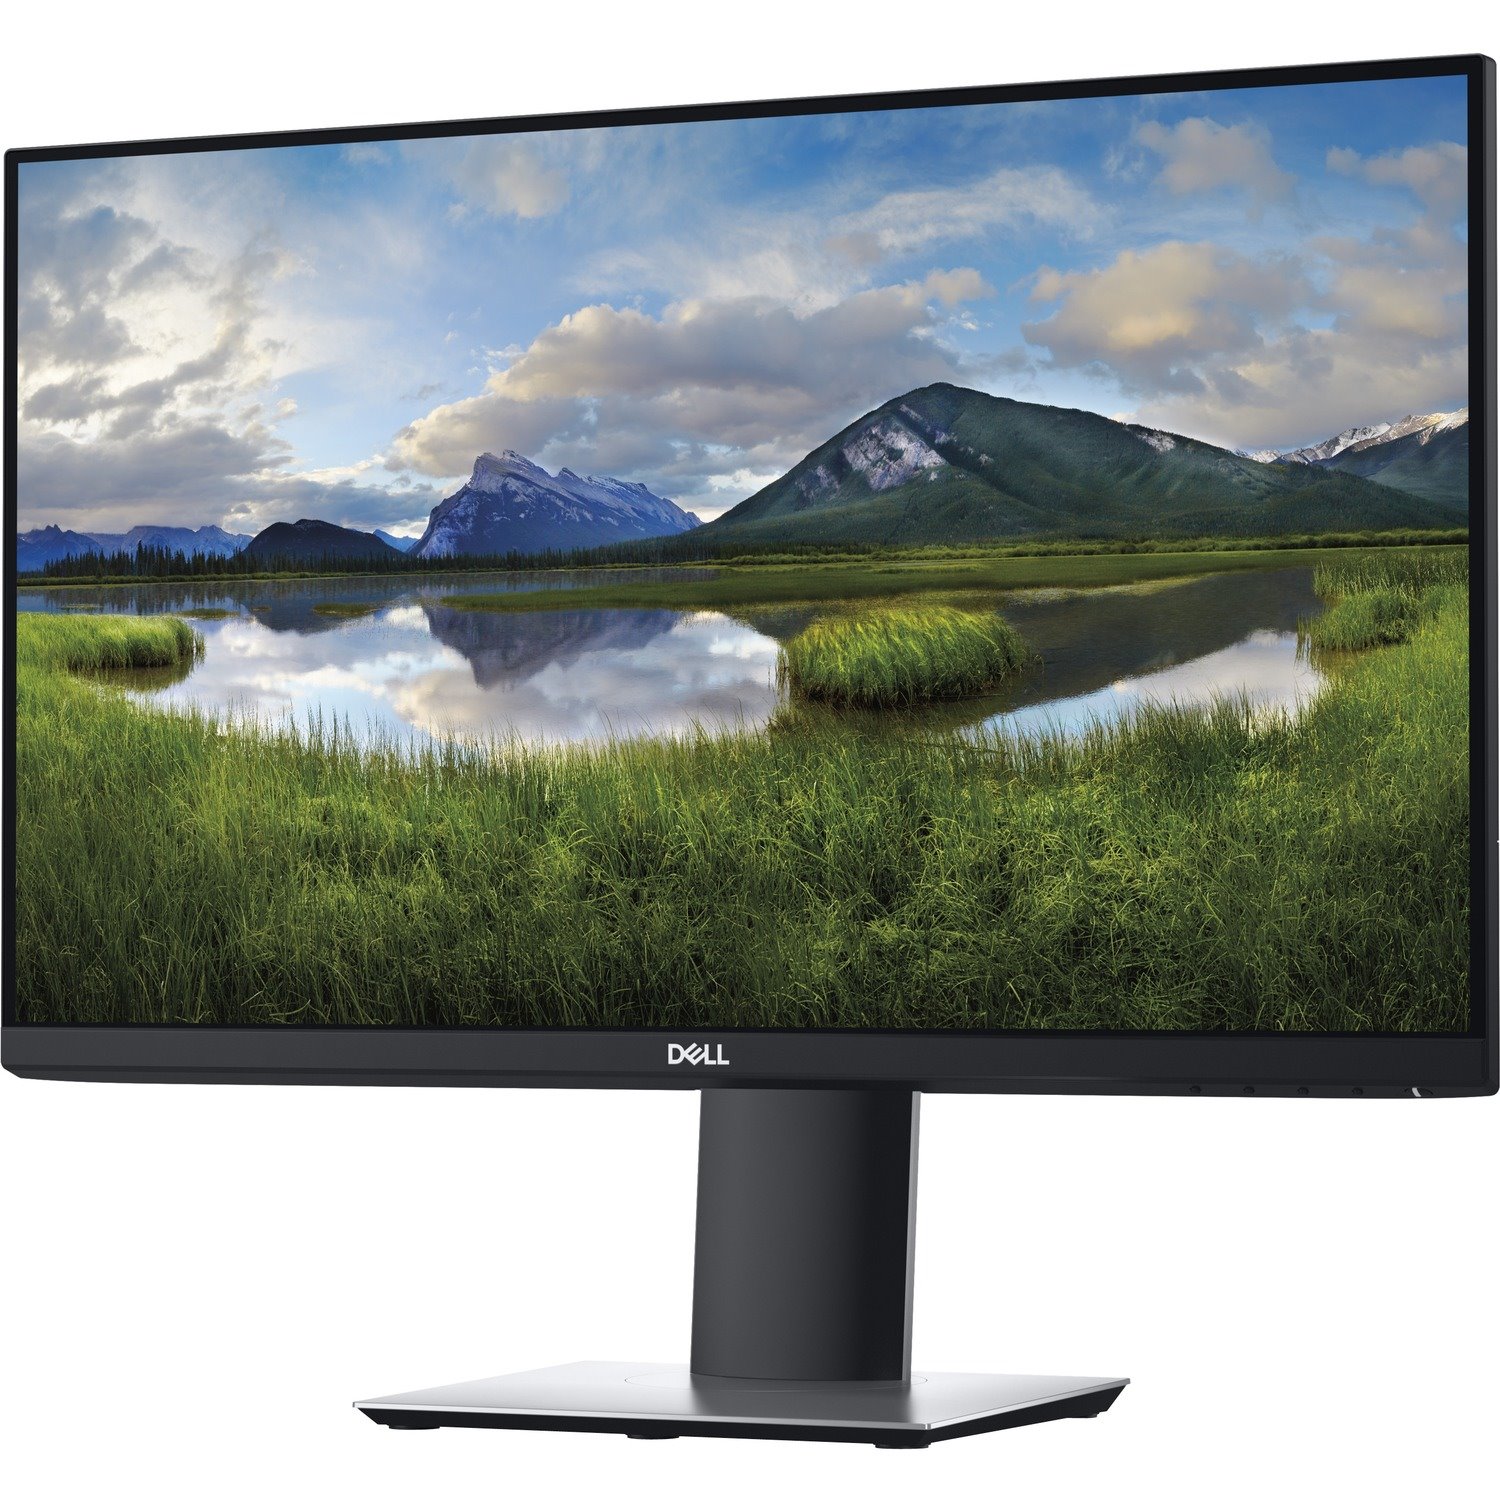 Dell-IMSourcing P2419H 24" Class Full HD LCD Monitor - 16:9 - Black, Gray